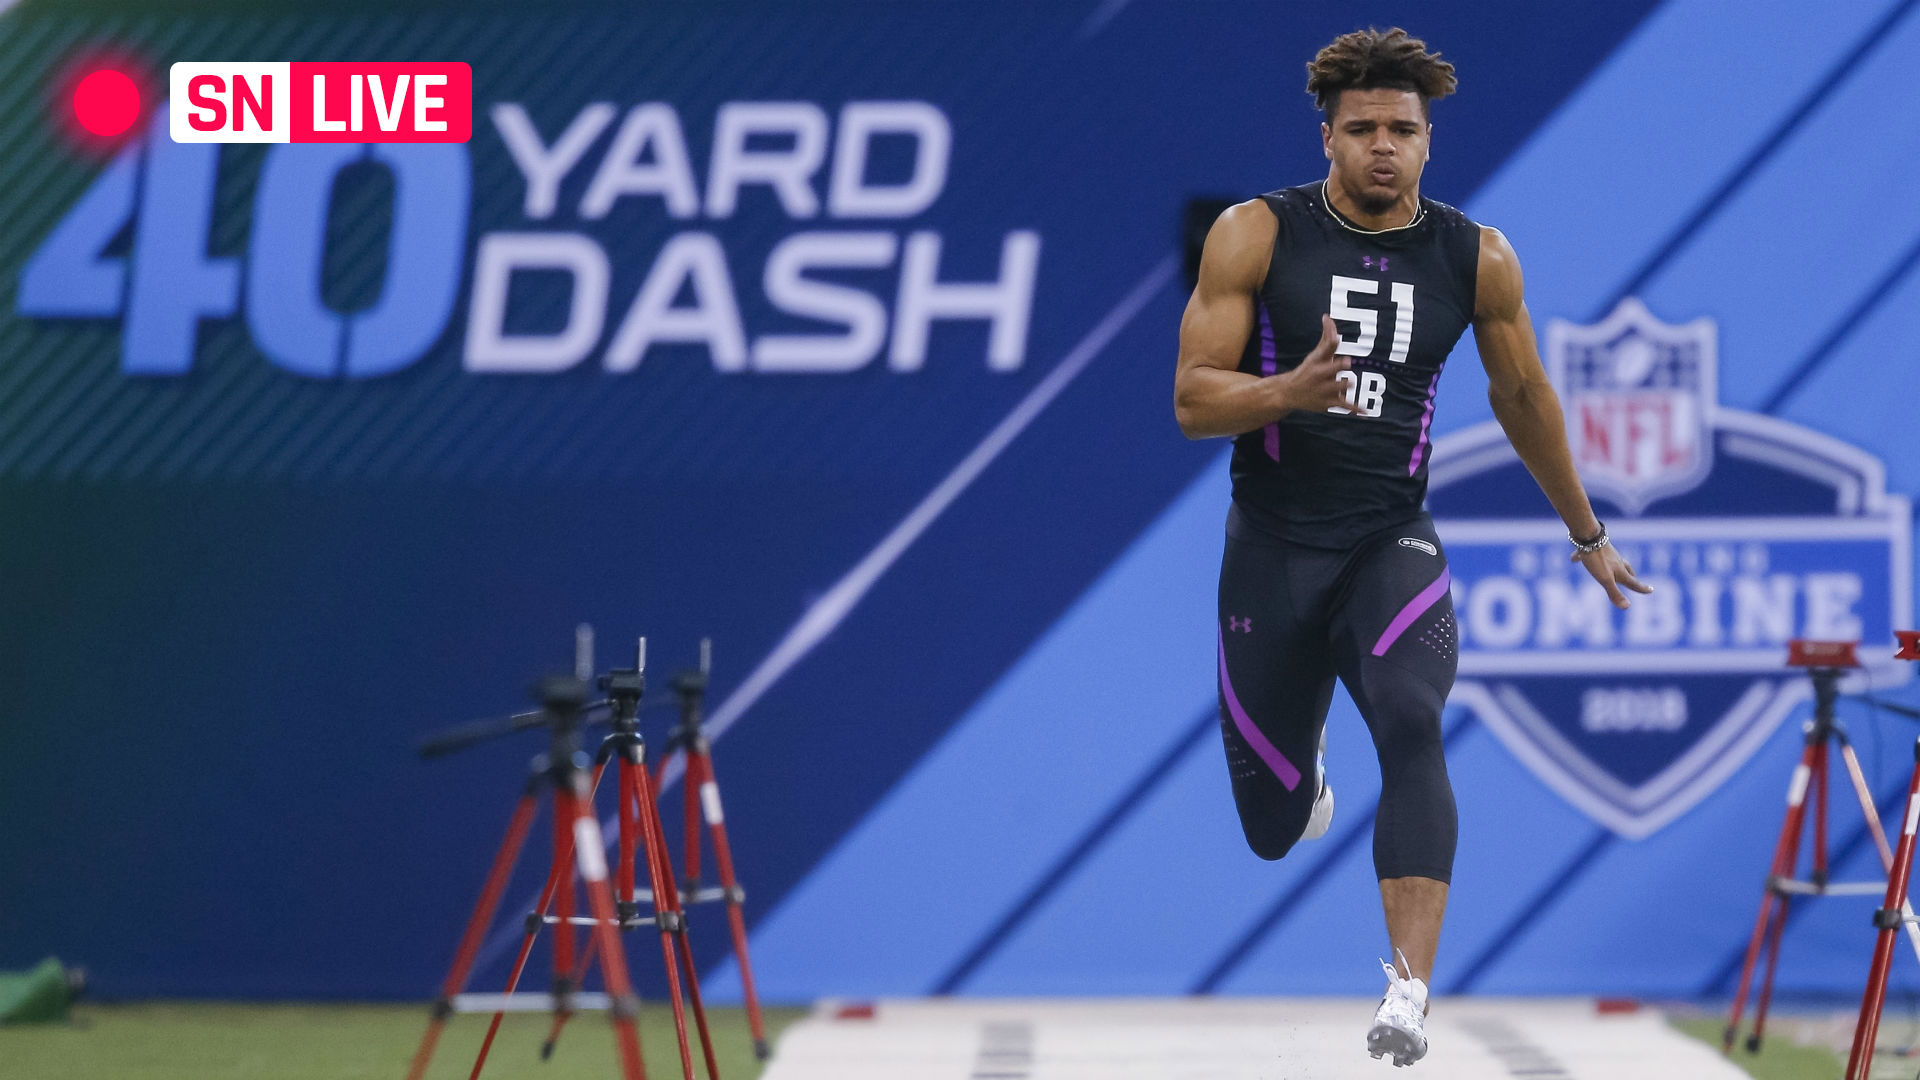 NFL Draft Combine results: Live tracker, highlights from player